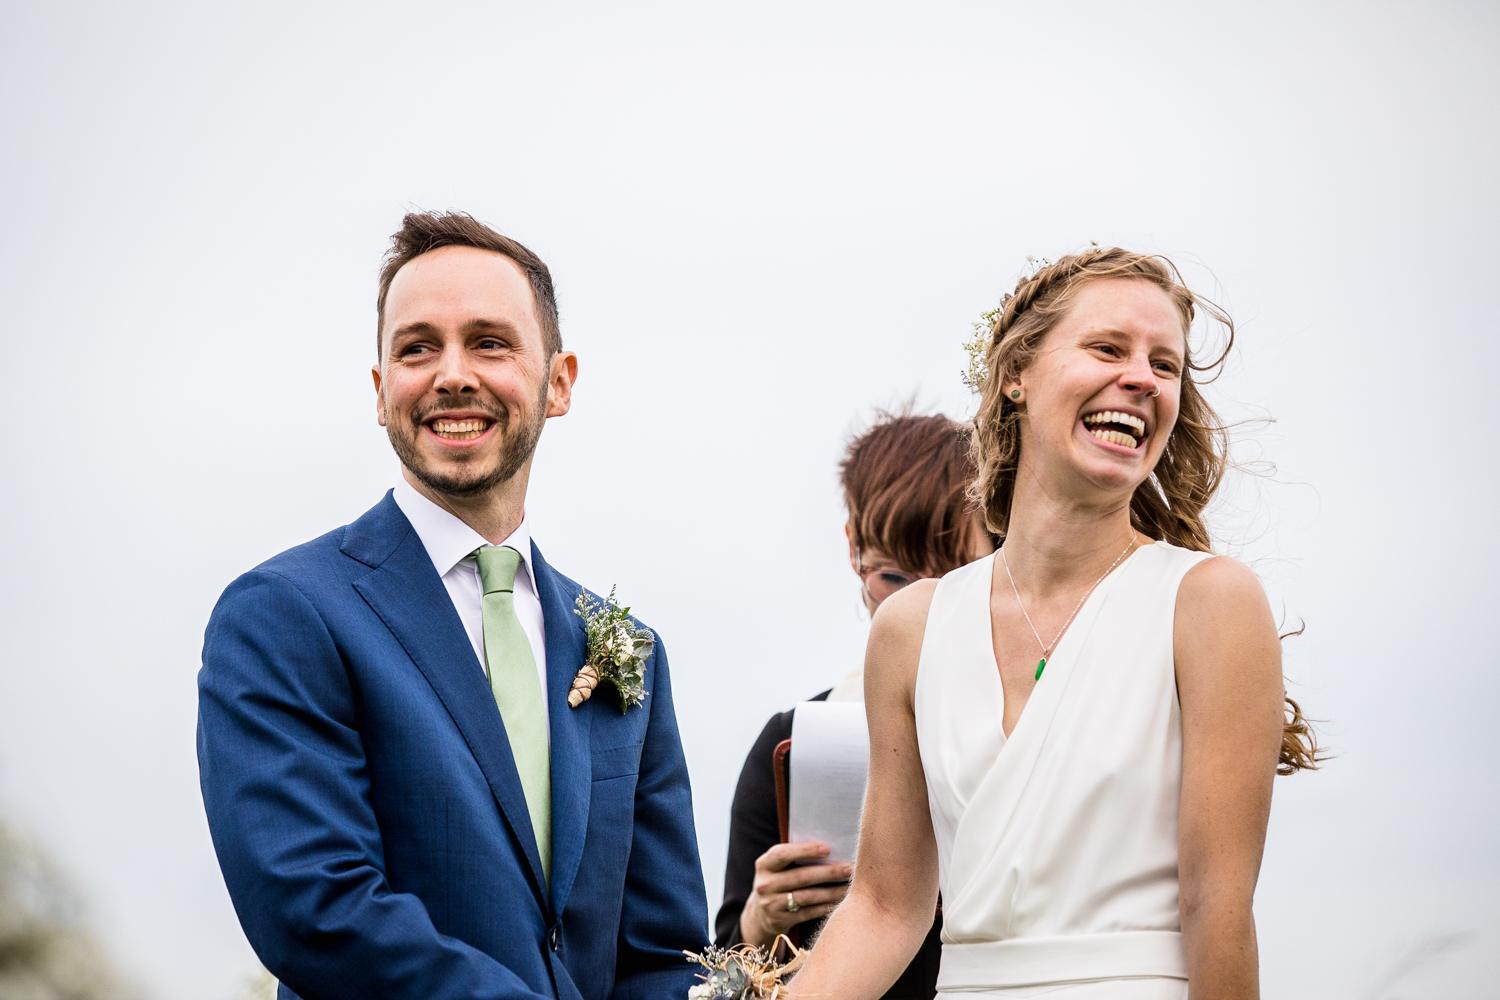 A bride and groom laugh together during Illinois Beach Resort wedding ceremony